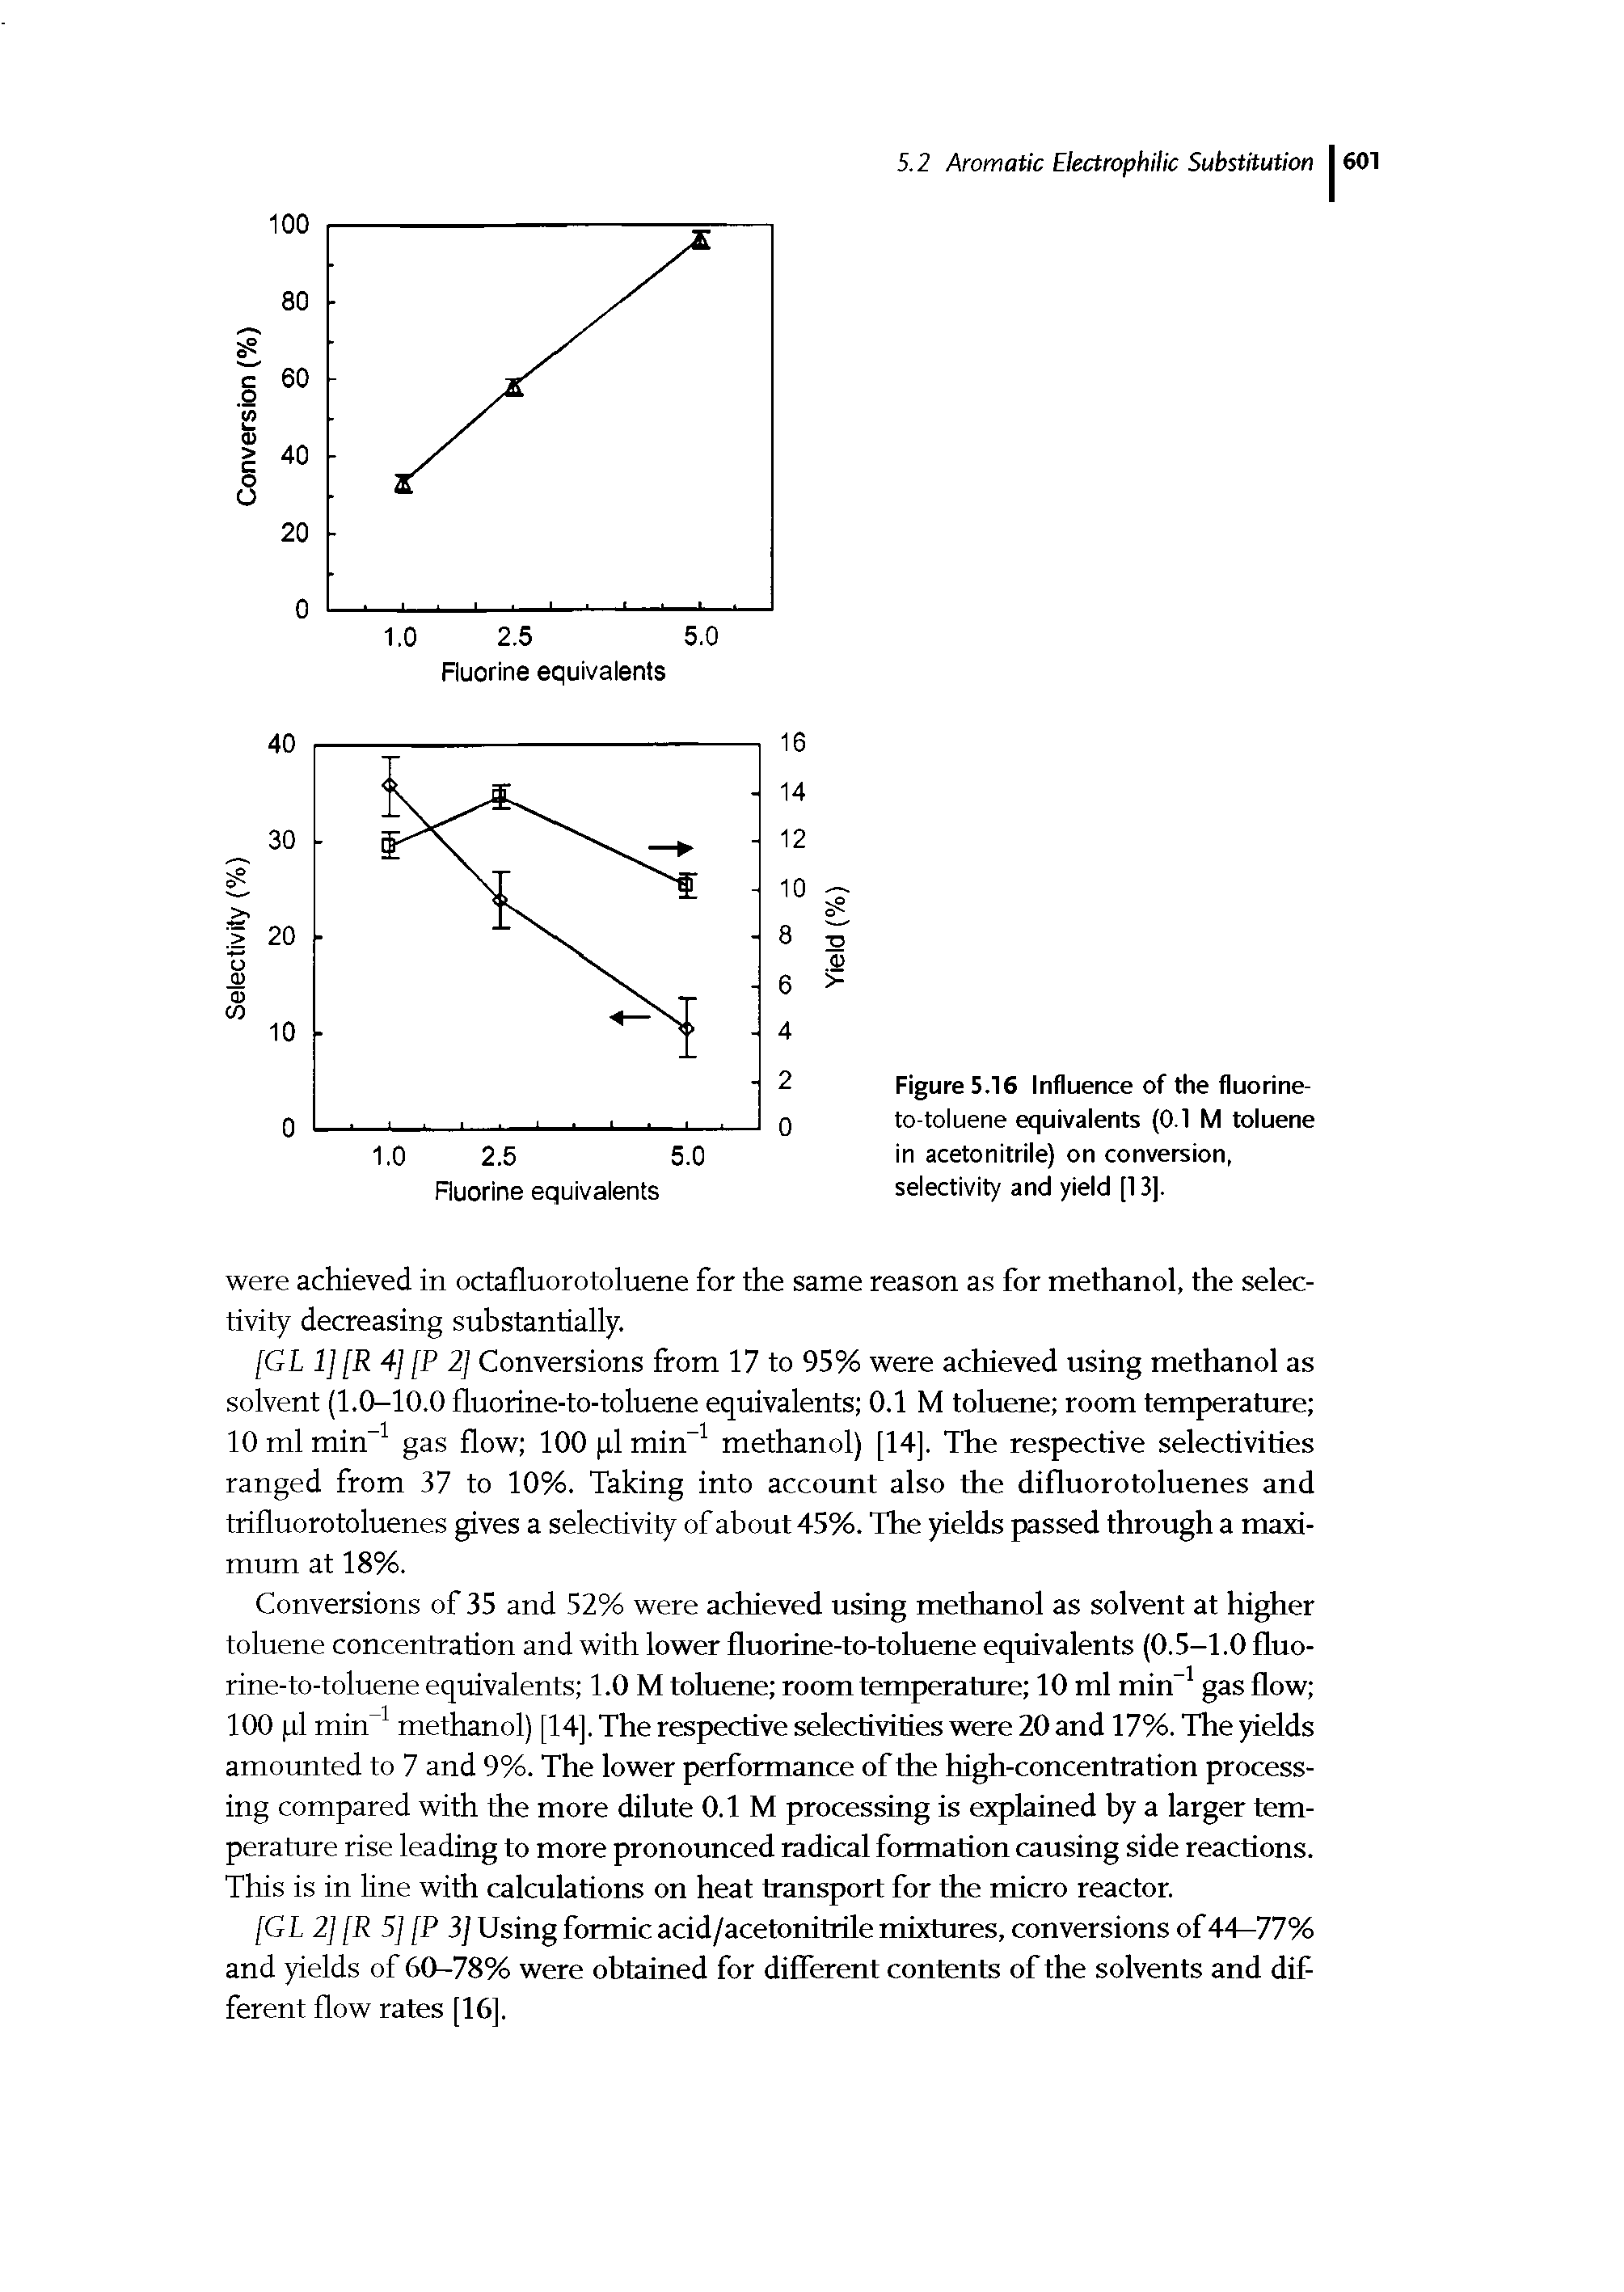 Figure 5.16 Influence of the fluorine-to-toluene equivalents (0.1 M toluene in acetonitrile) on conversion, selectivity and yield [13].